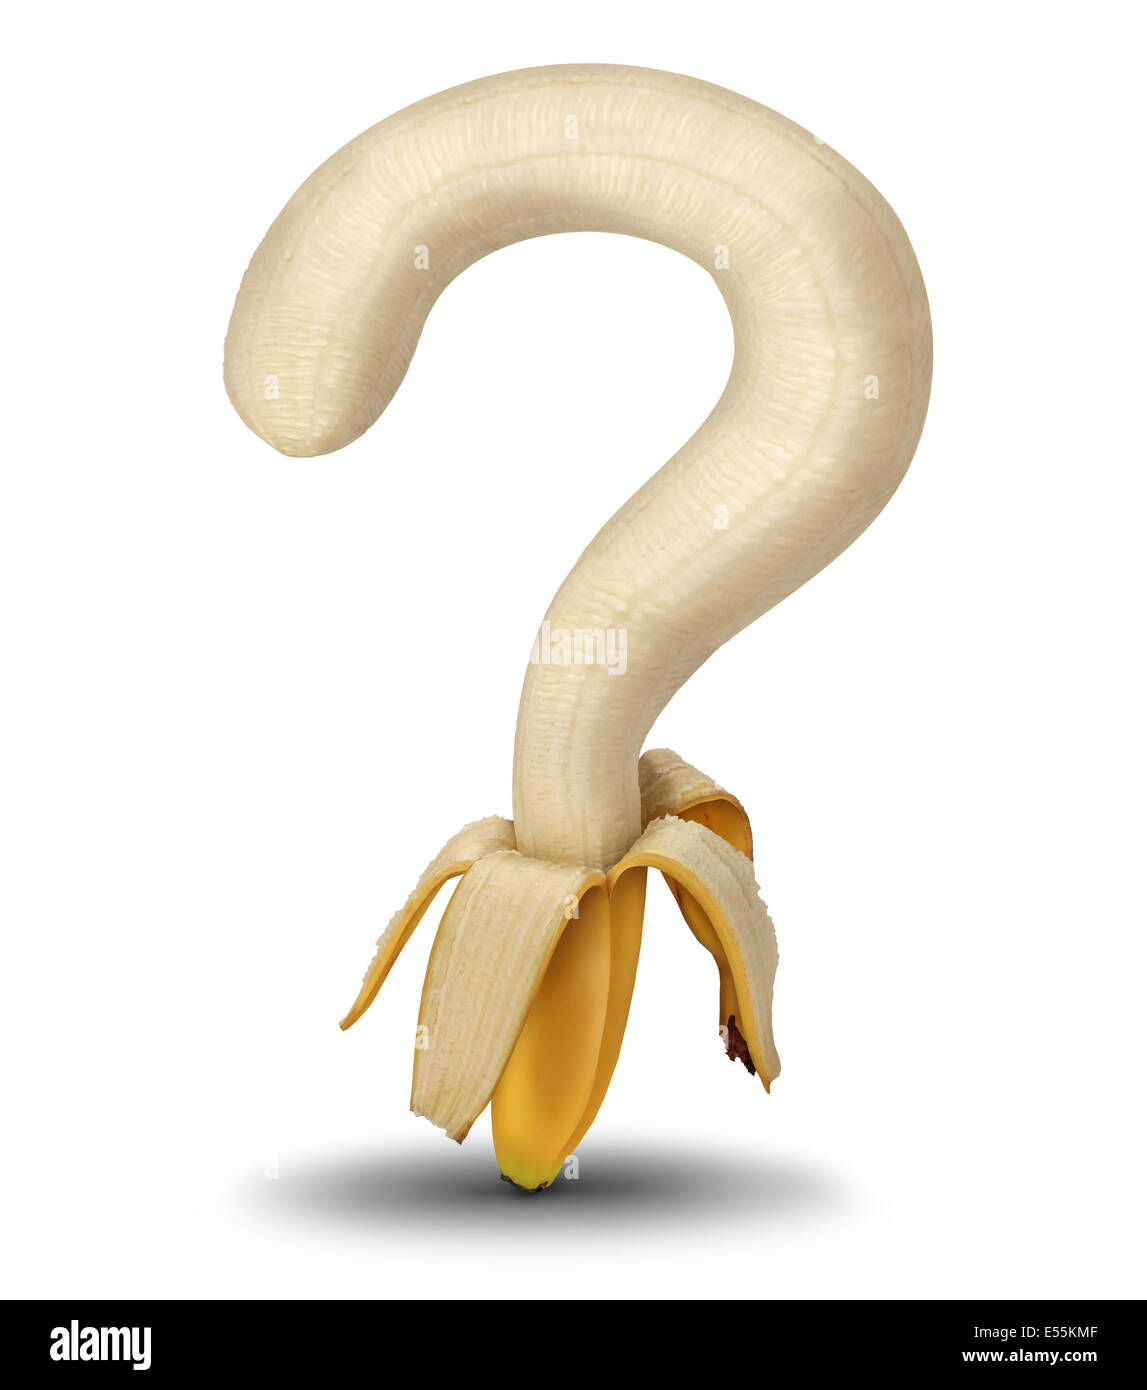 Nutrition questions and choosing healthy food options at the grocery store or market with aan open peeled banana shaped as a question mark as a symbol for diet guidance and eating habits on a white background. Stock Photo